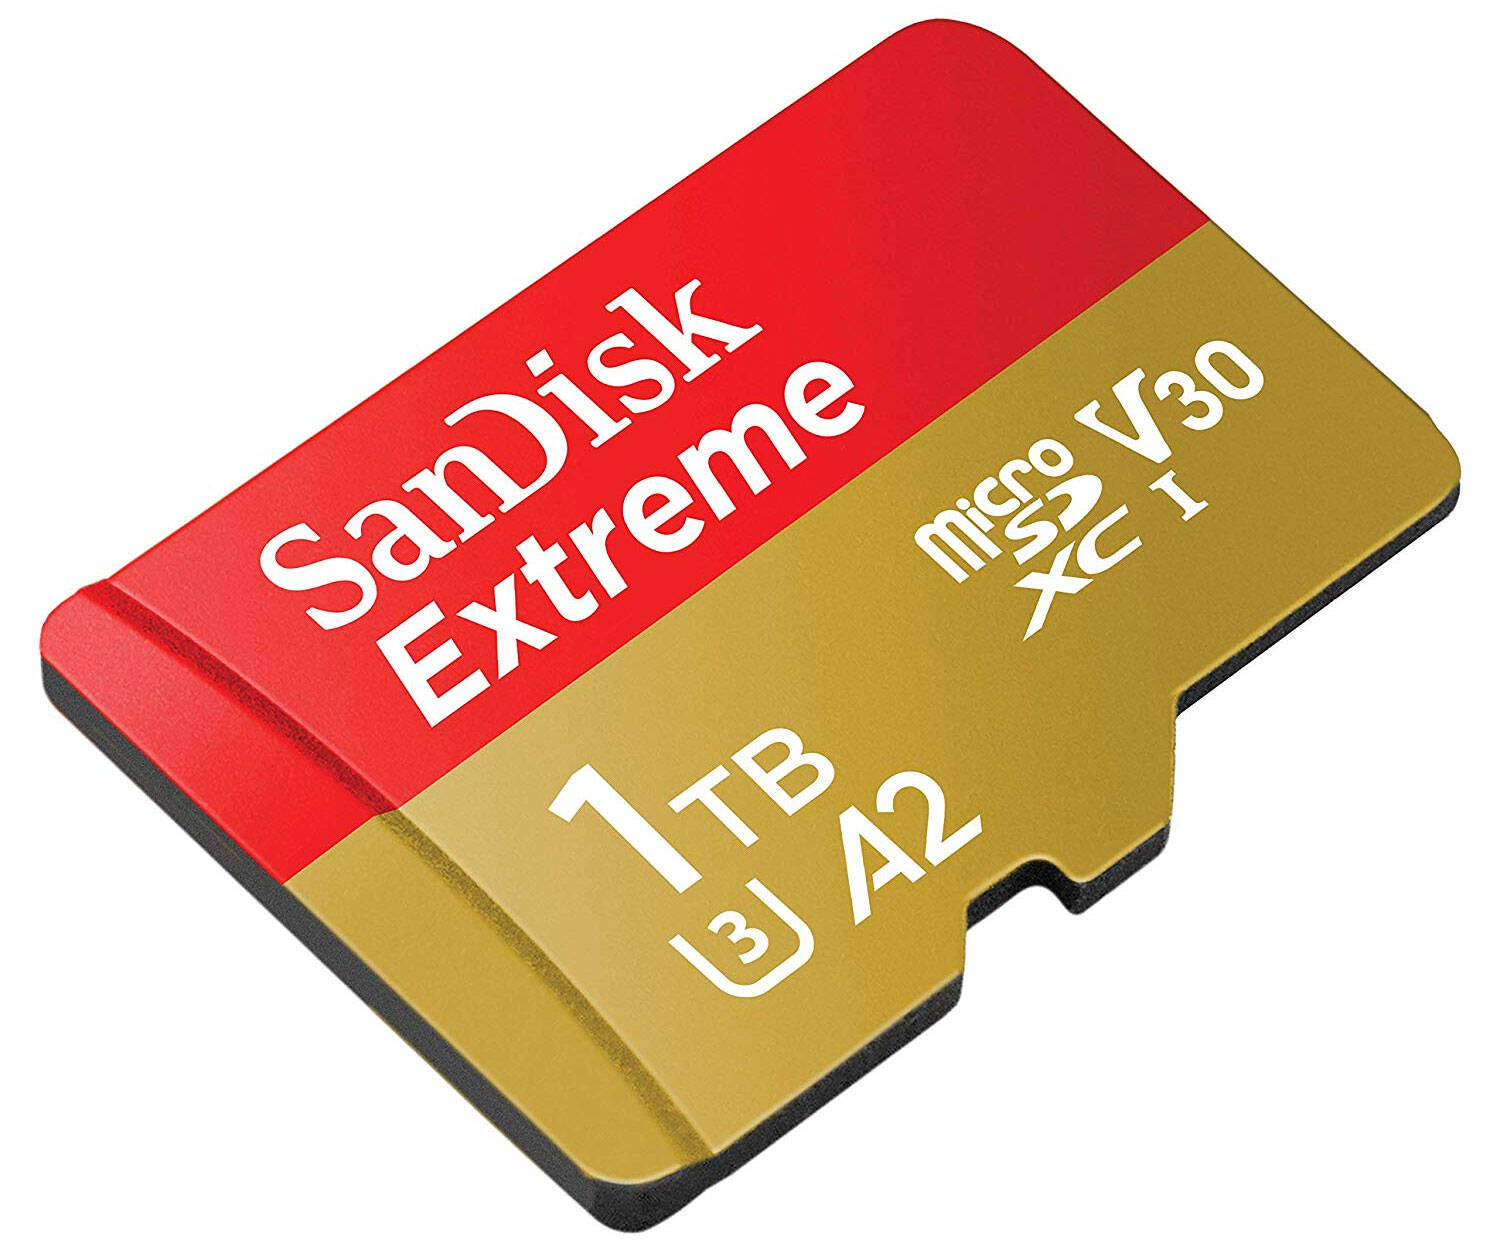 1TB MicroSD Card - coolthings.us